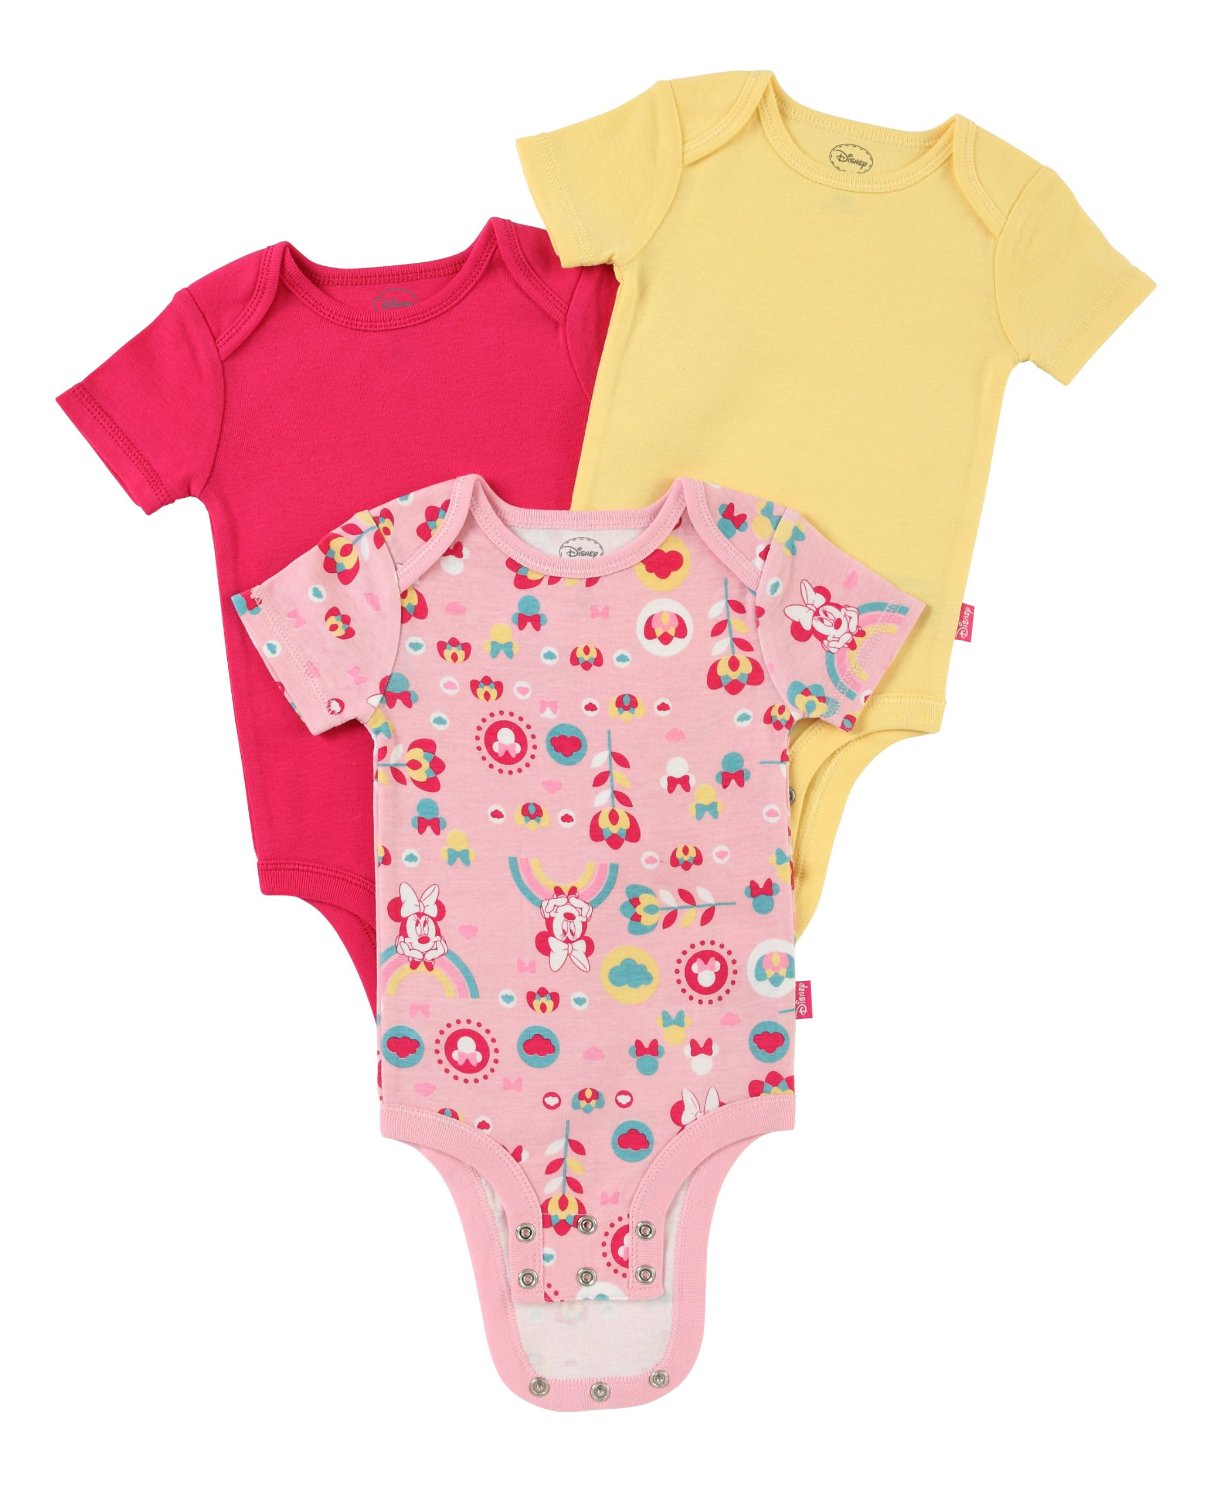 Disney Cuddly Bodysuits with Grow an Inch Snaps 3 pack as low as $5.55!